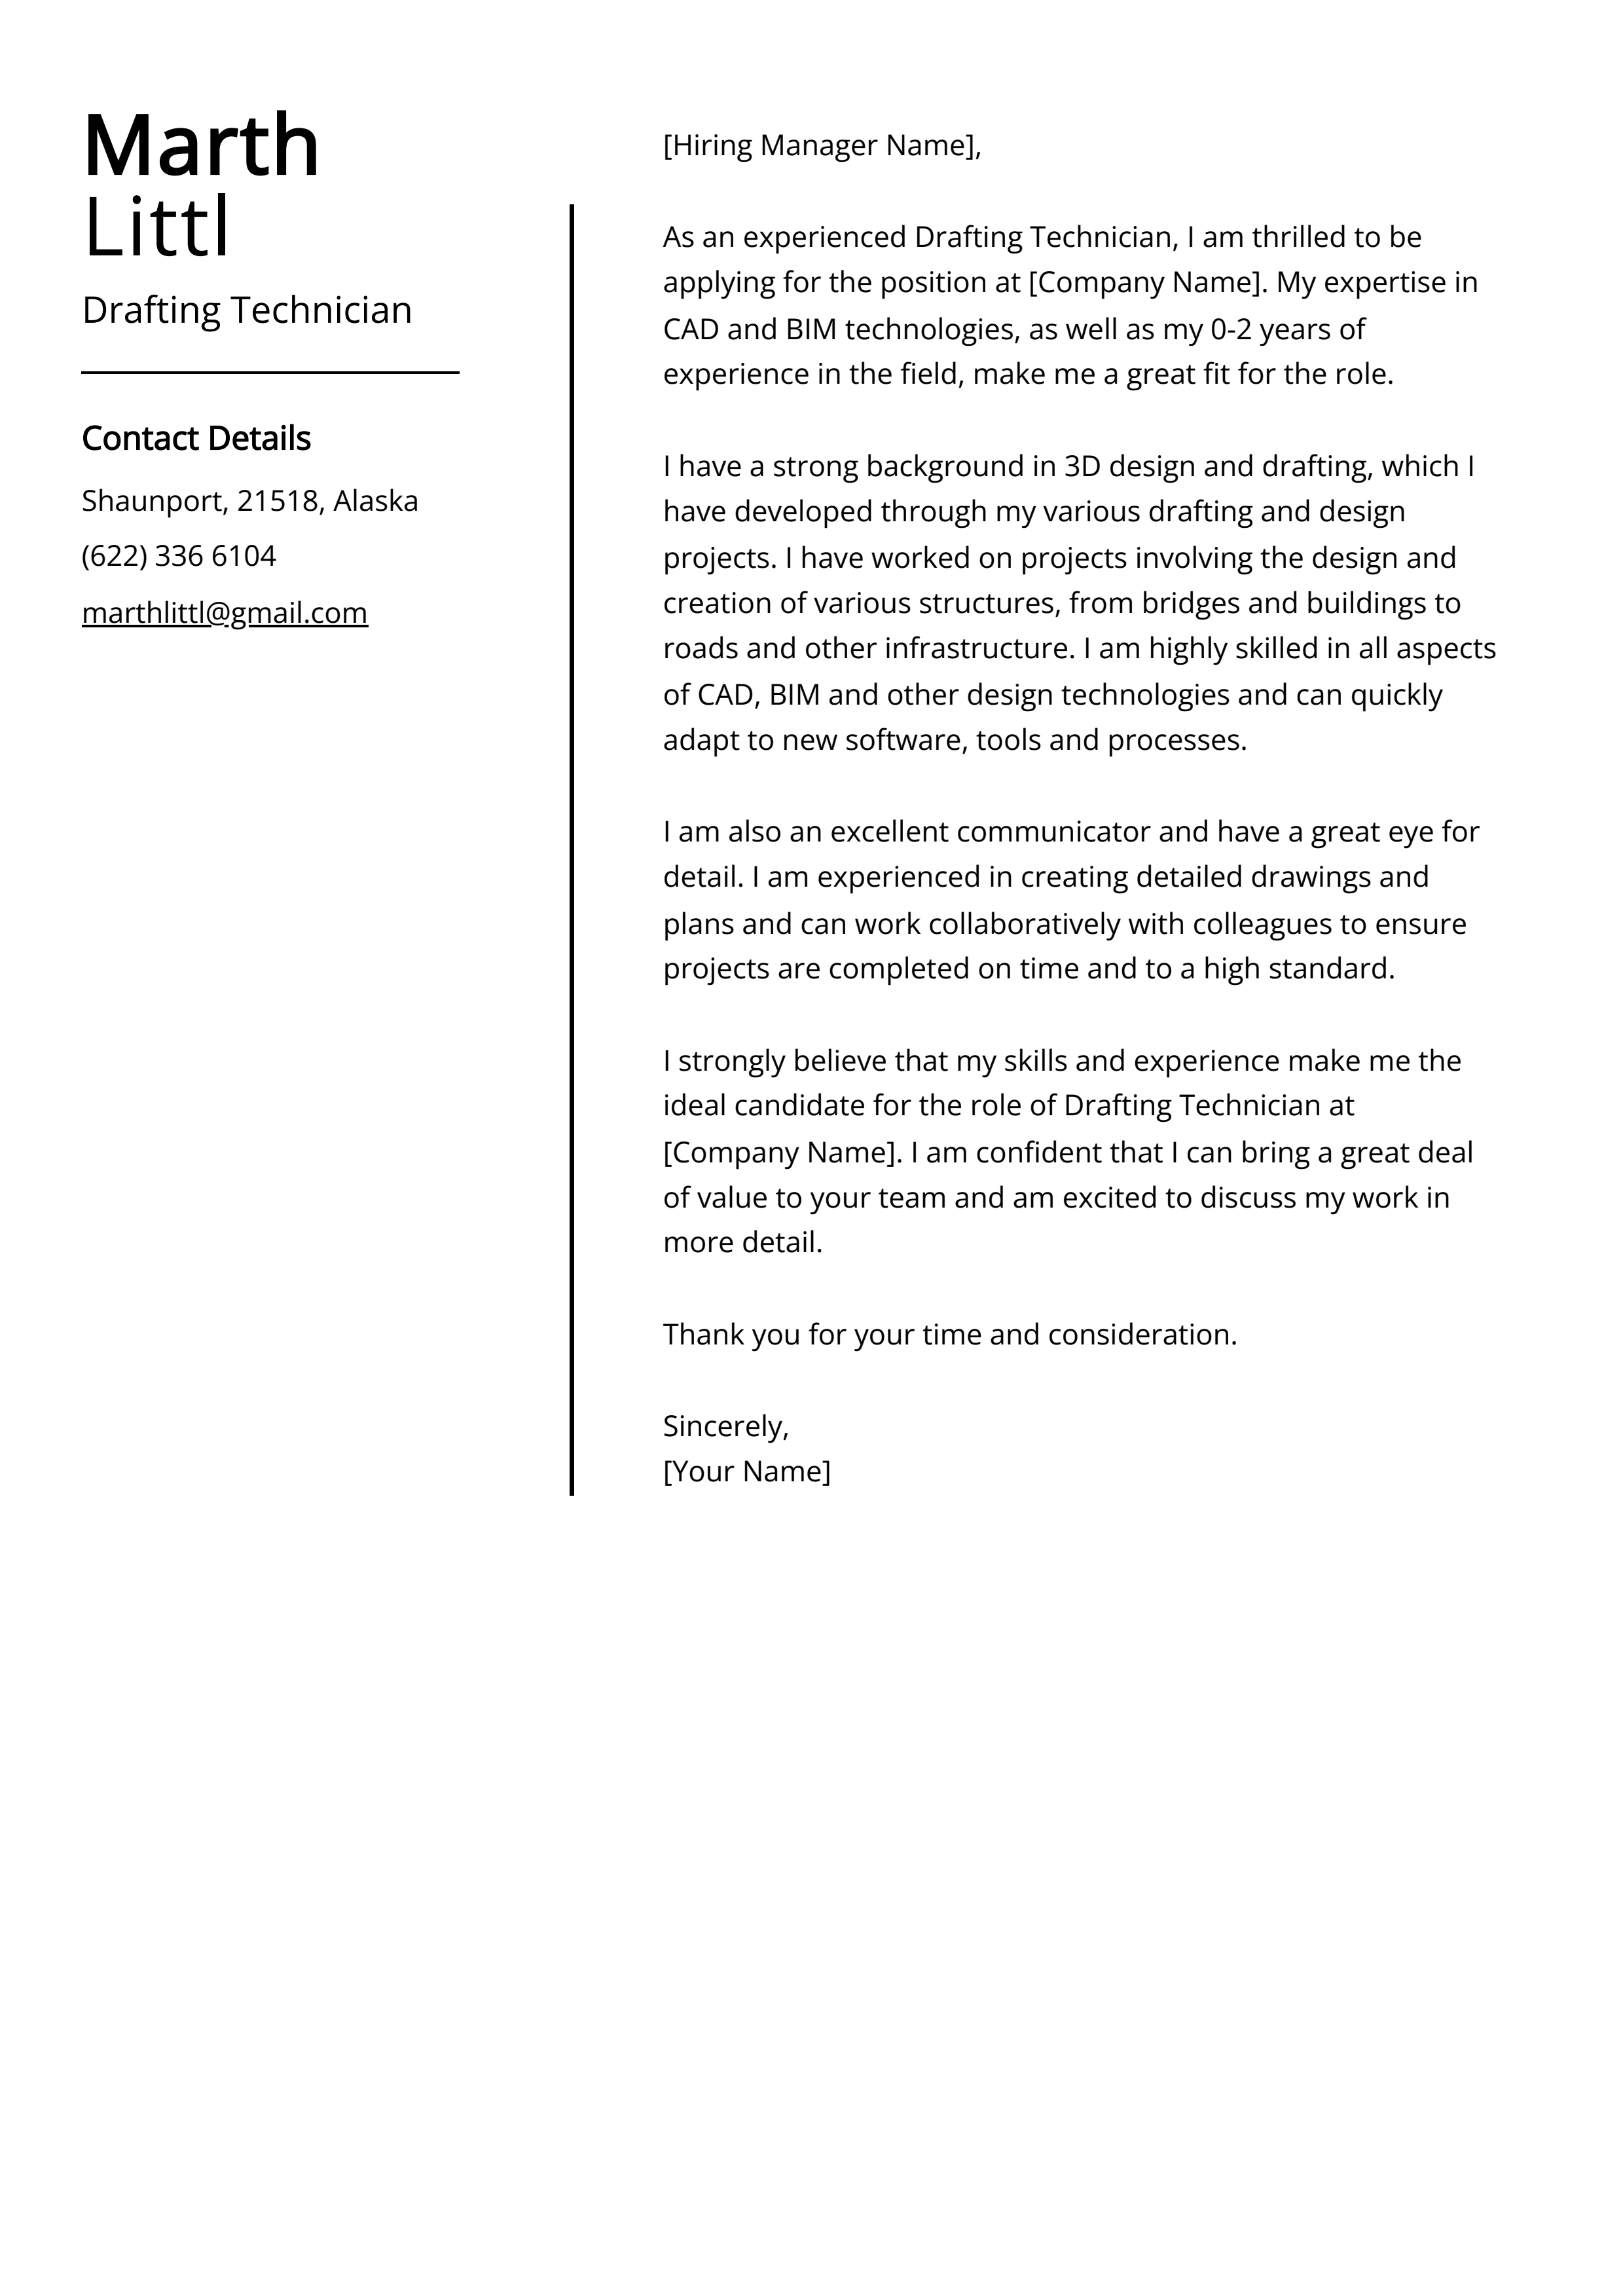 Drafting Technician Cover Letter Example